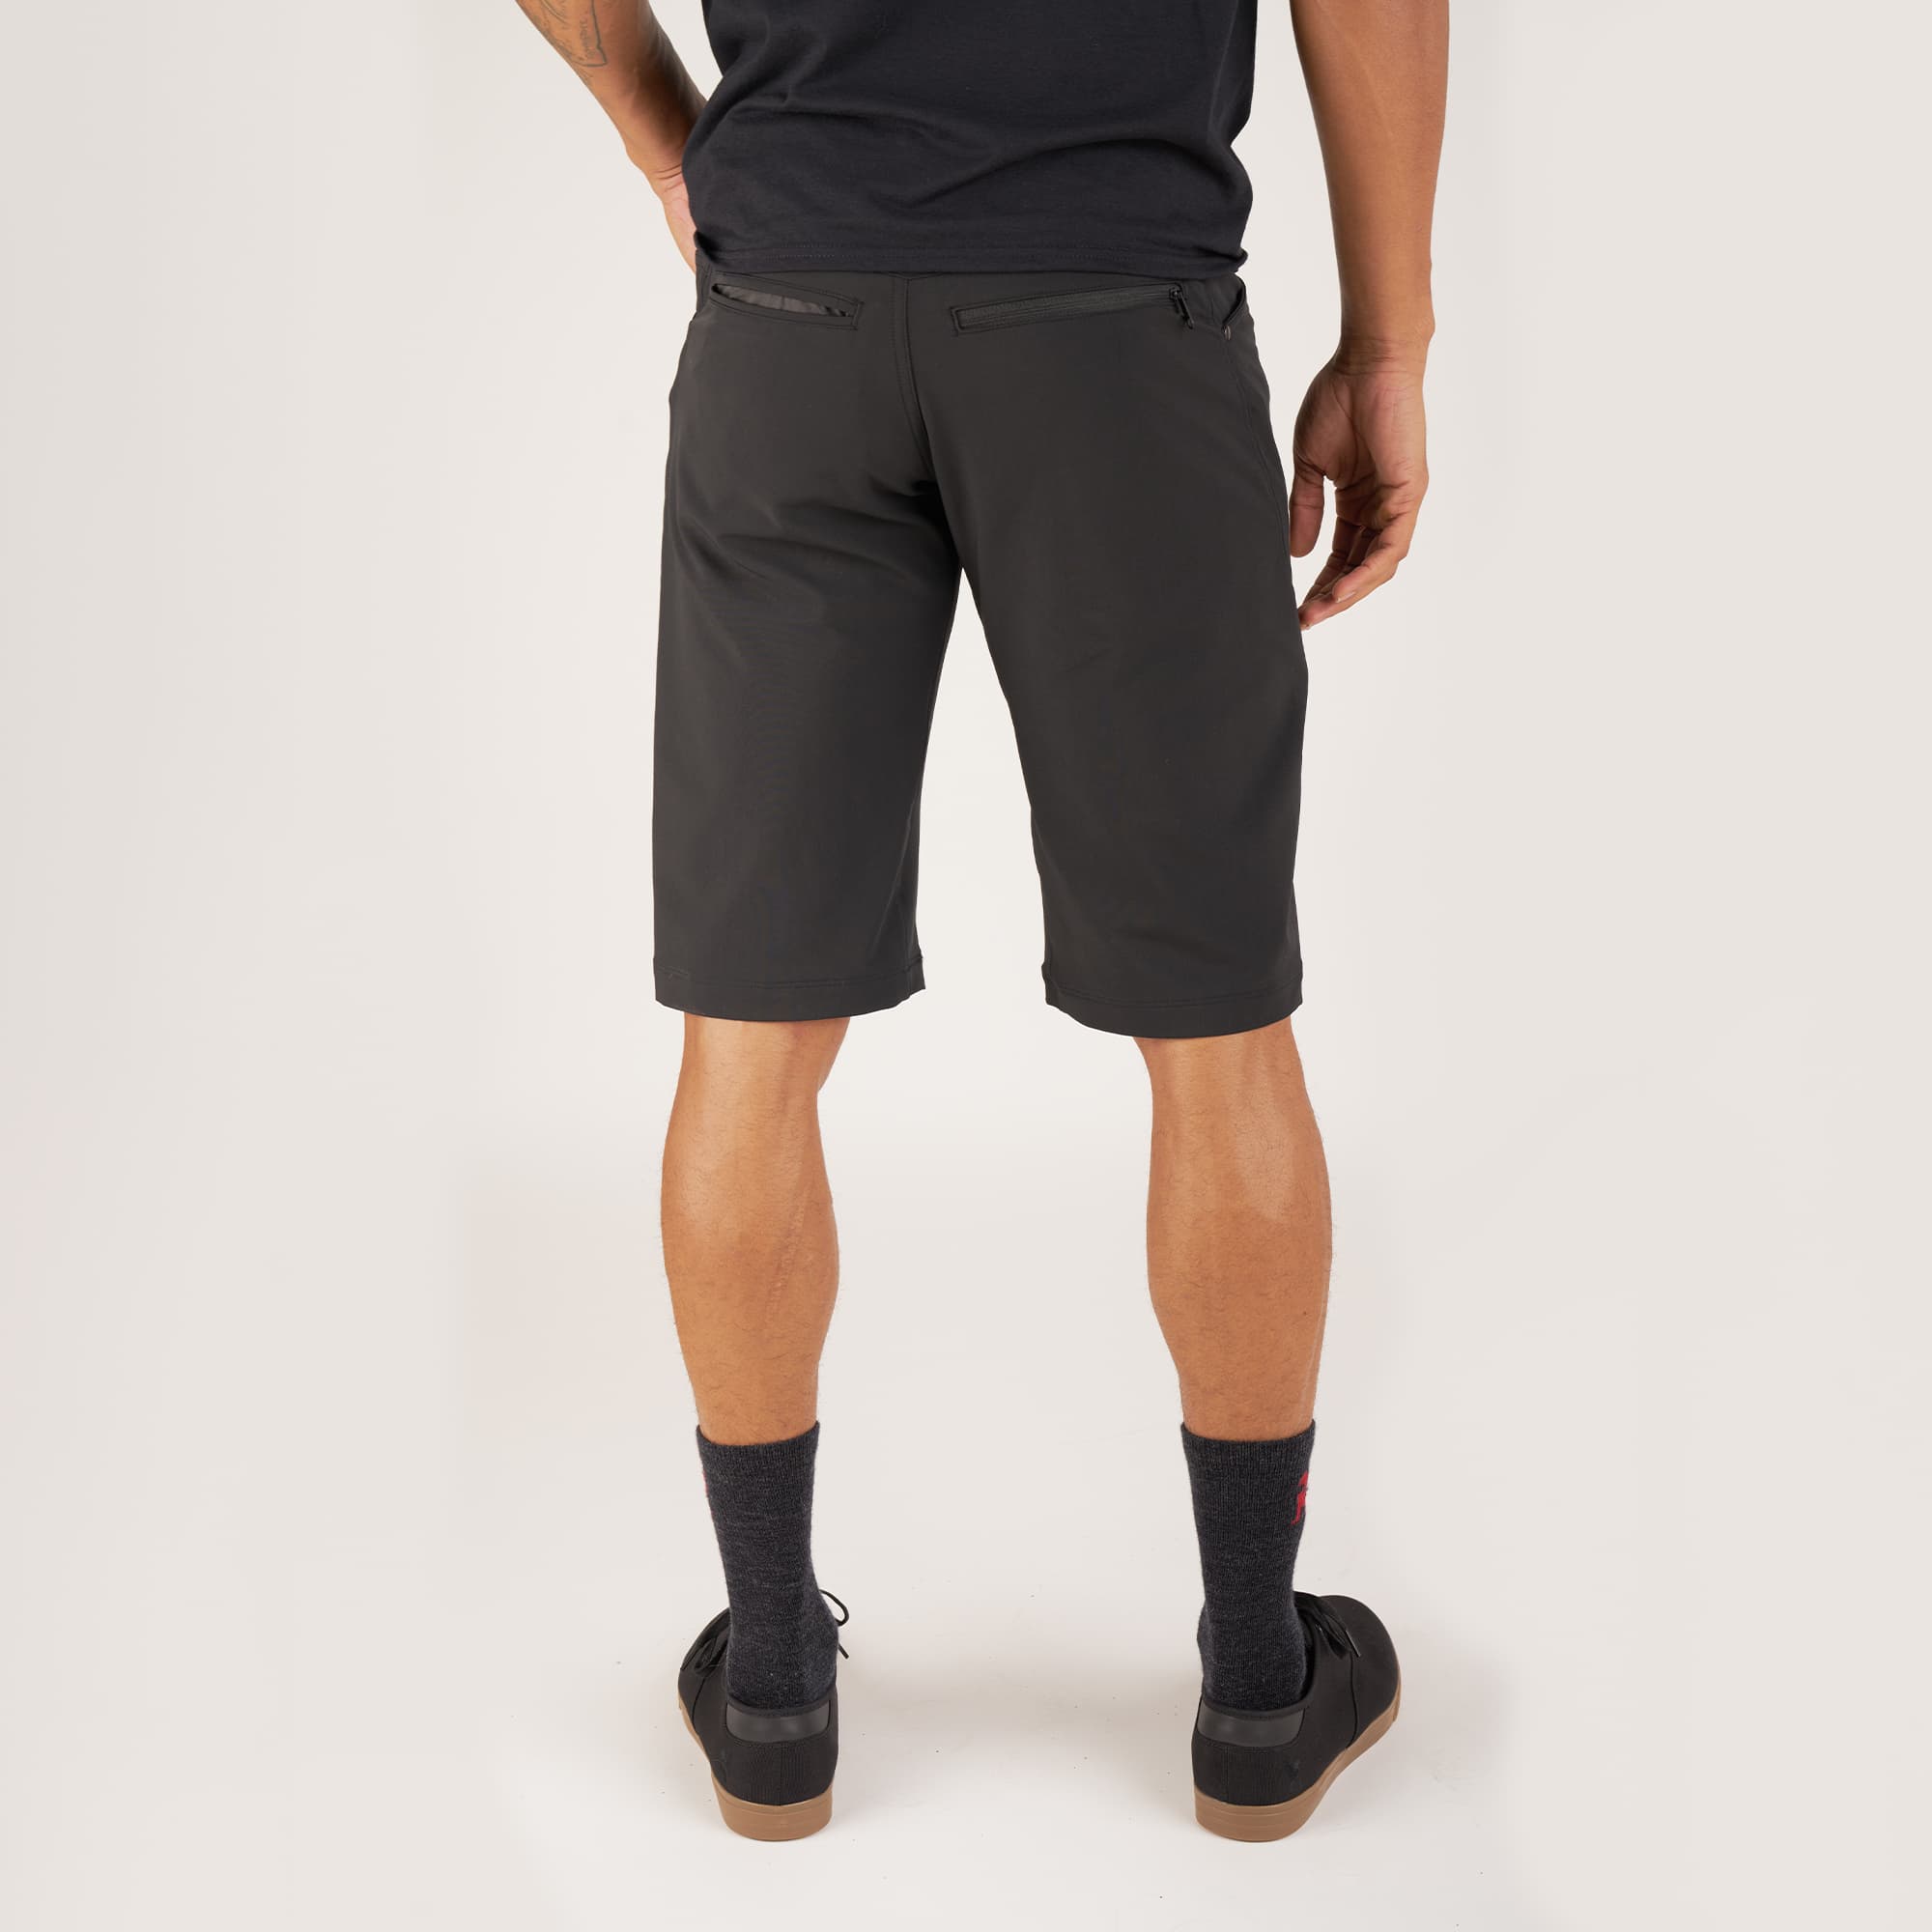 Men's Union Short 14" inseam in black worn by a man back view #color_black